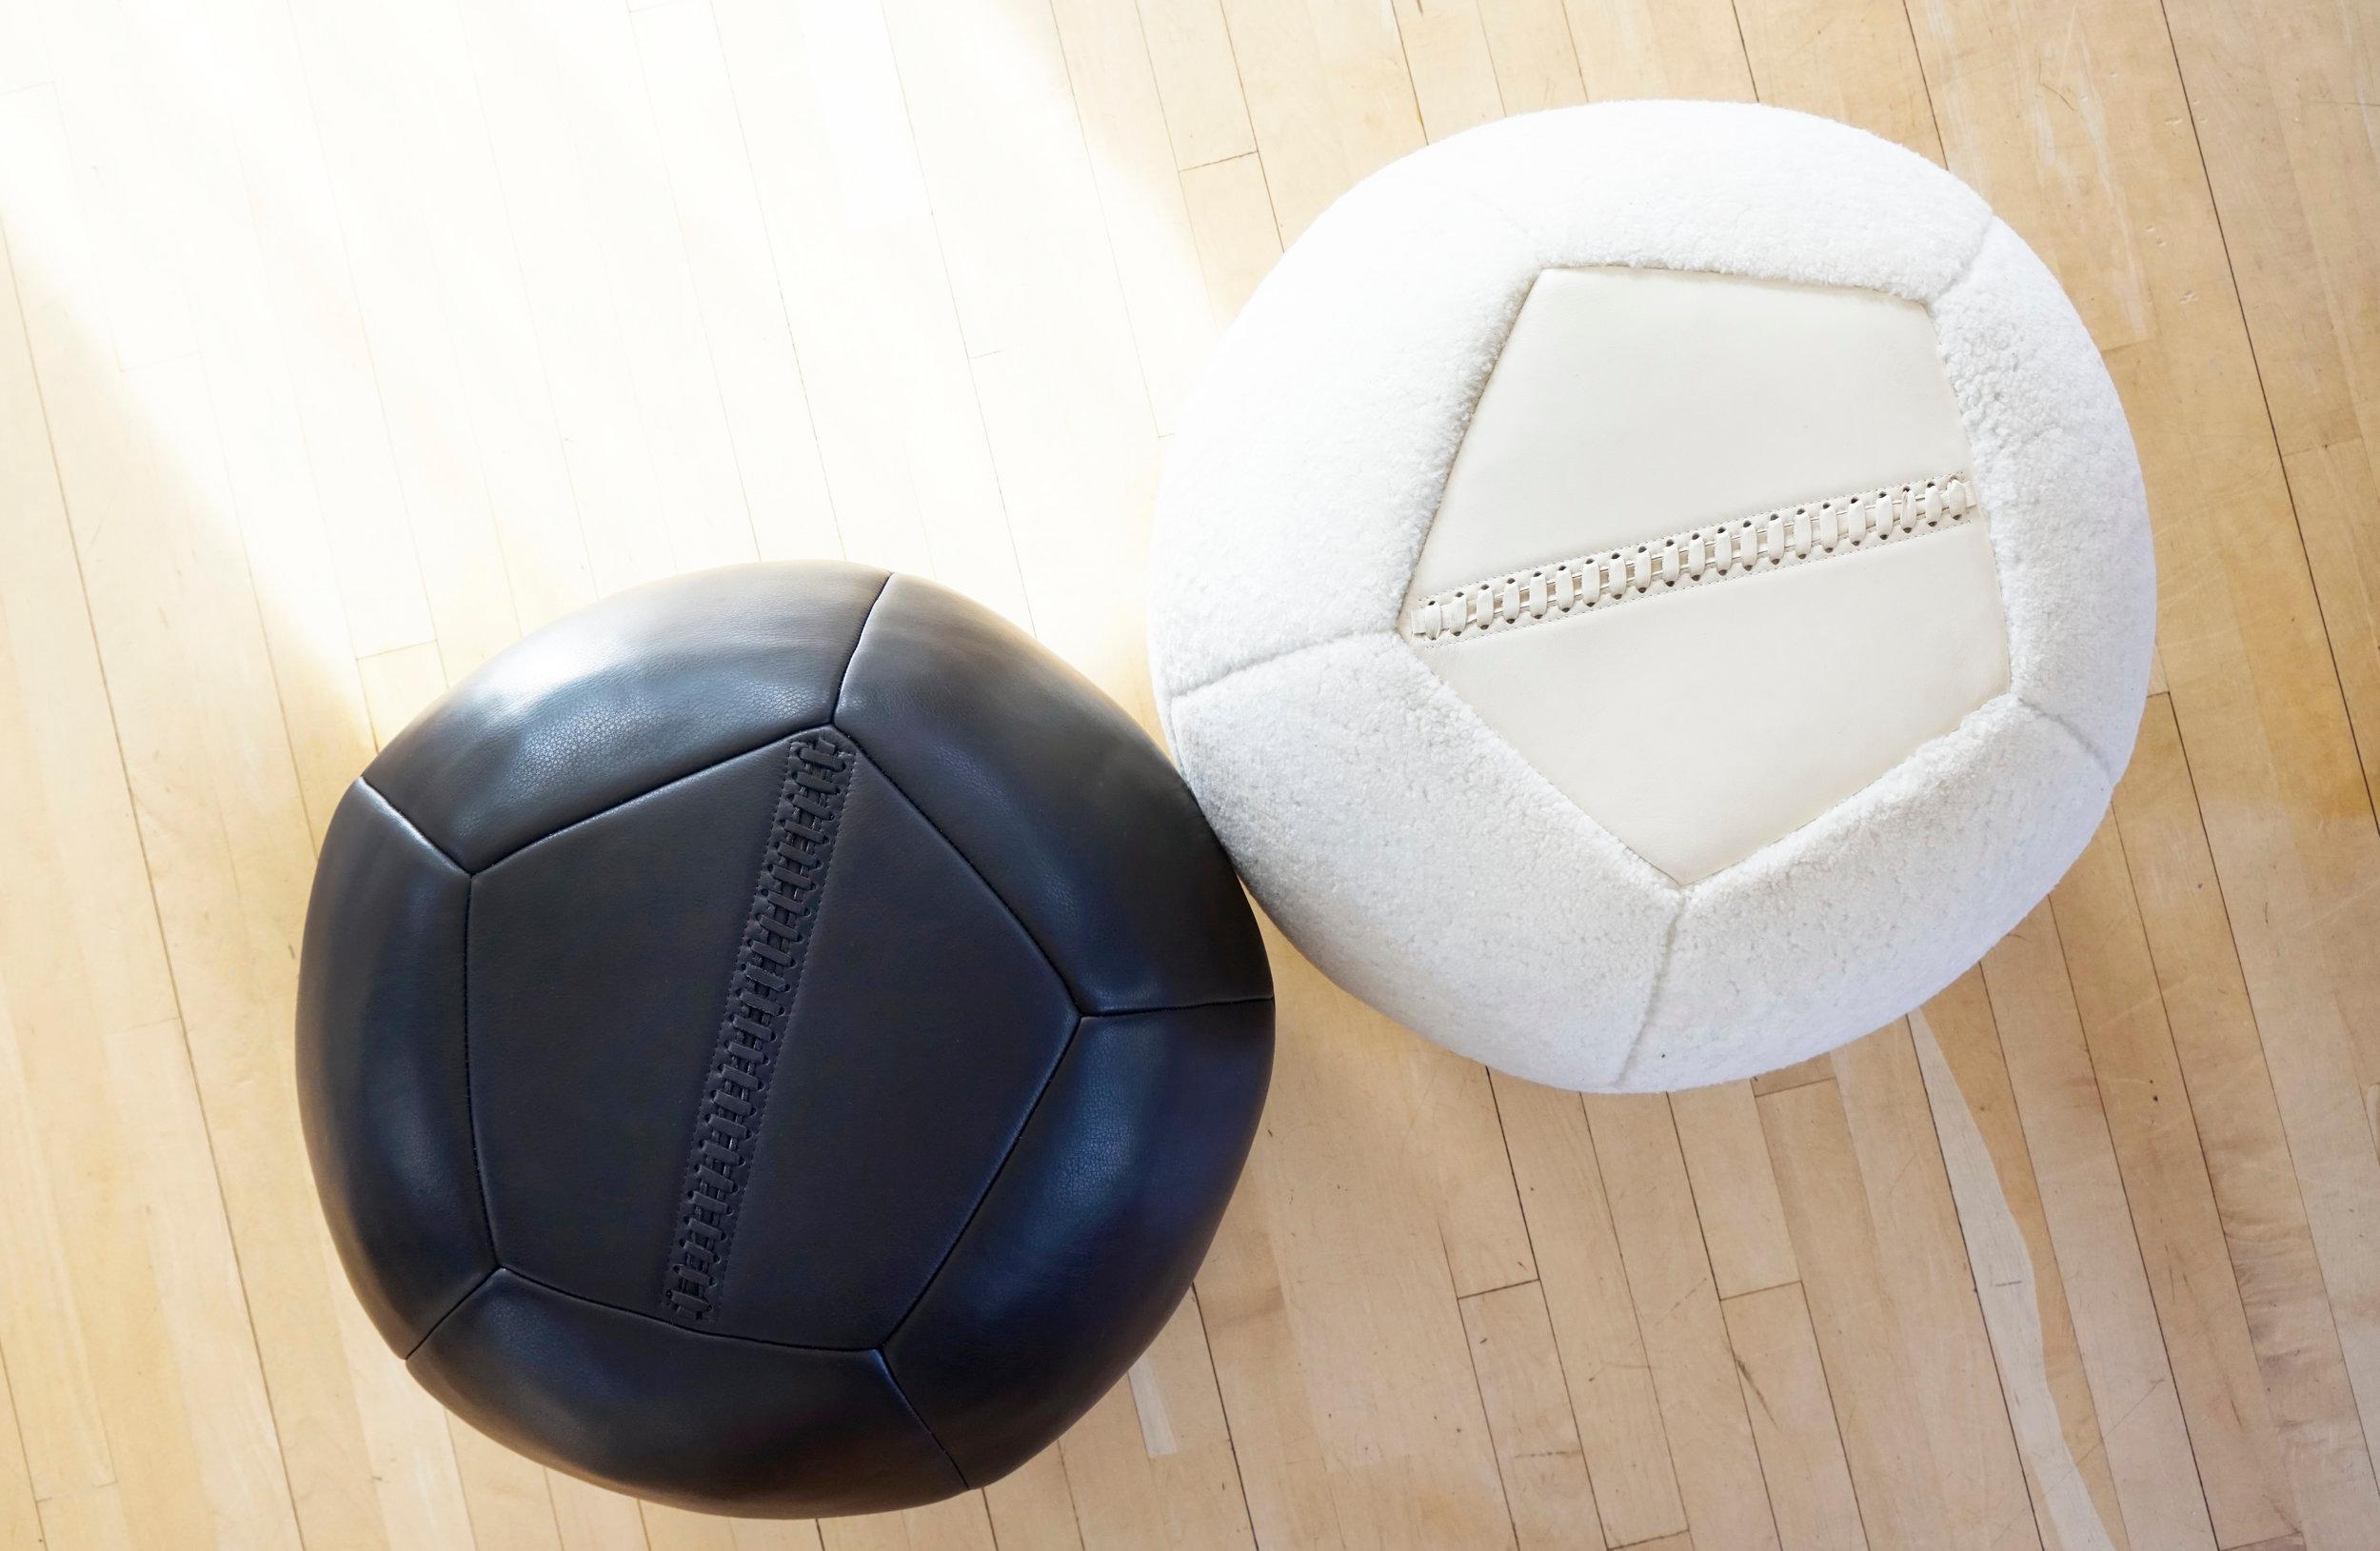 Crafted with supple European leather, the Ball Ottoman is designed to add a twist to living room seating, and act as a comfortable place to rest your legs or as playful and sculptural decor. Moses Nadel hand cuts each 5-sided panel from select hides